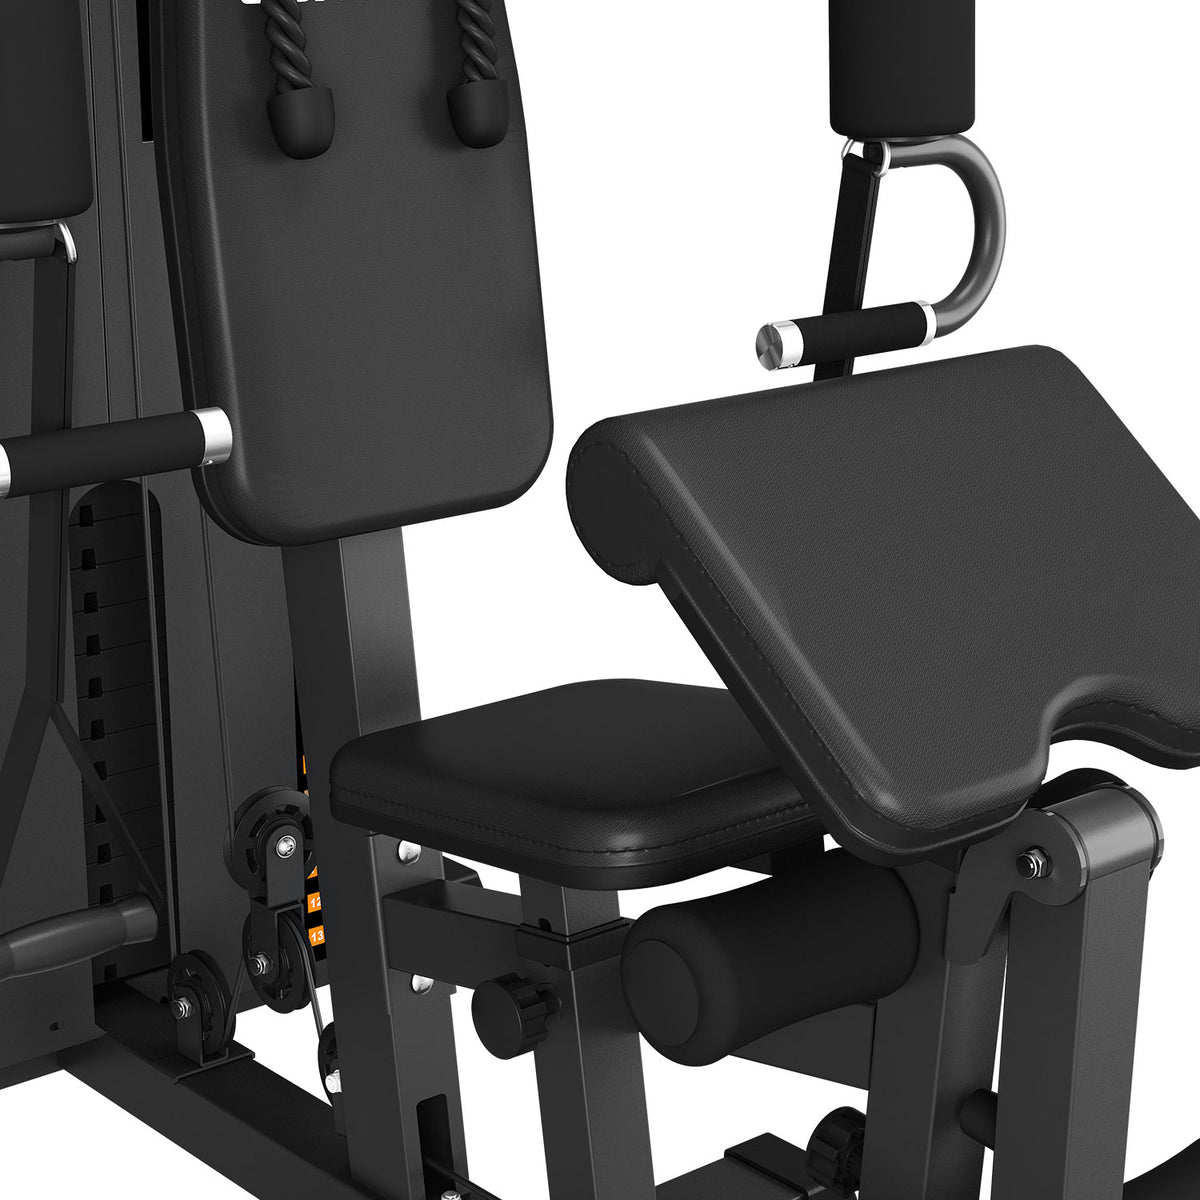 CORTEX SS3 Home Gym with Integrated Front/Rear Fly